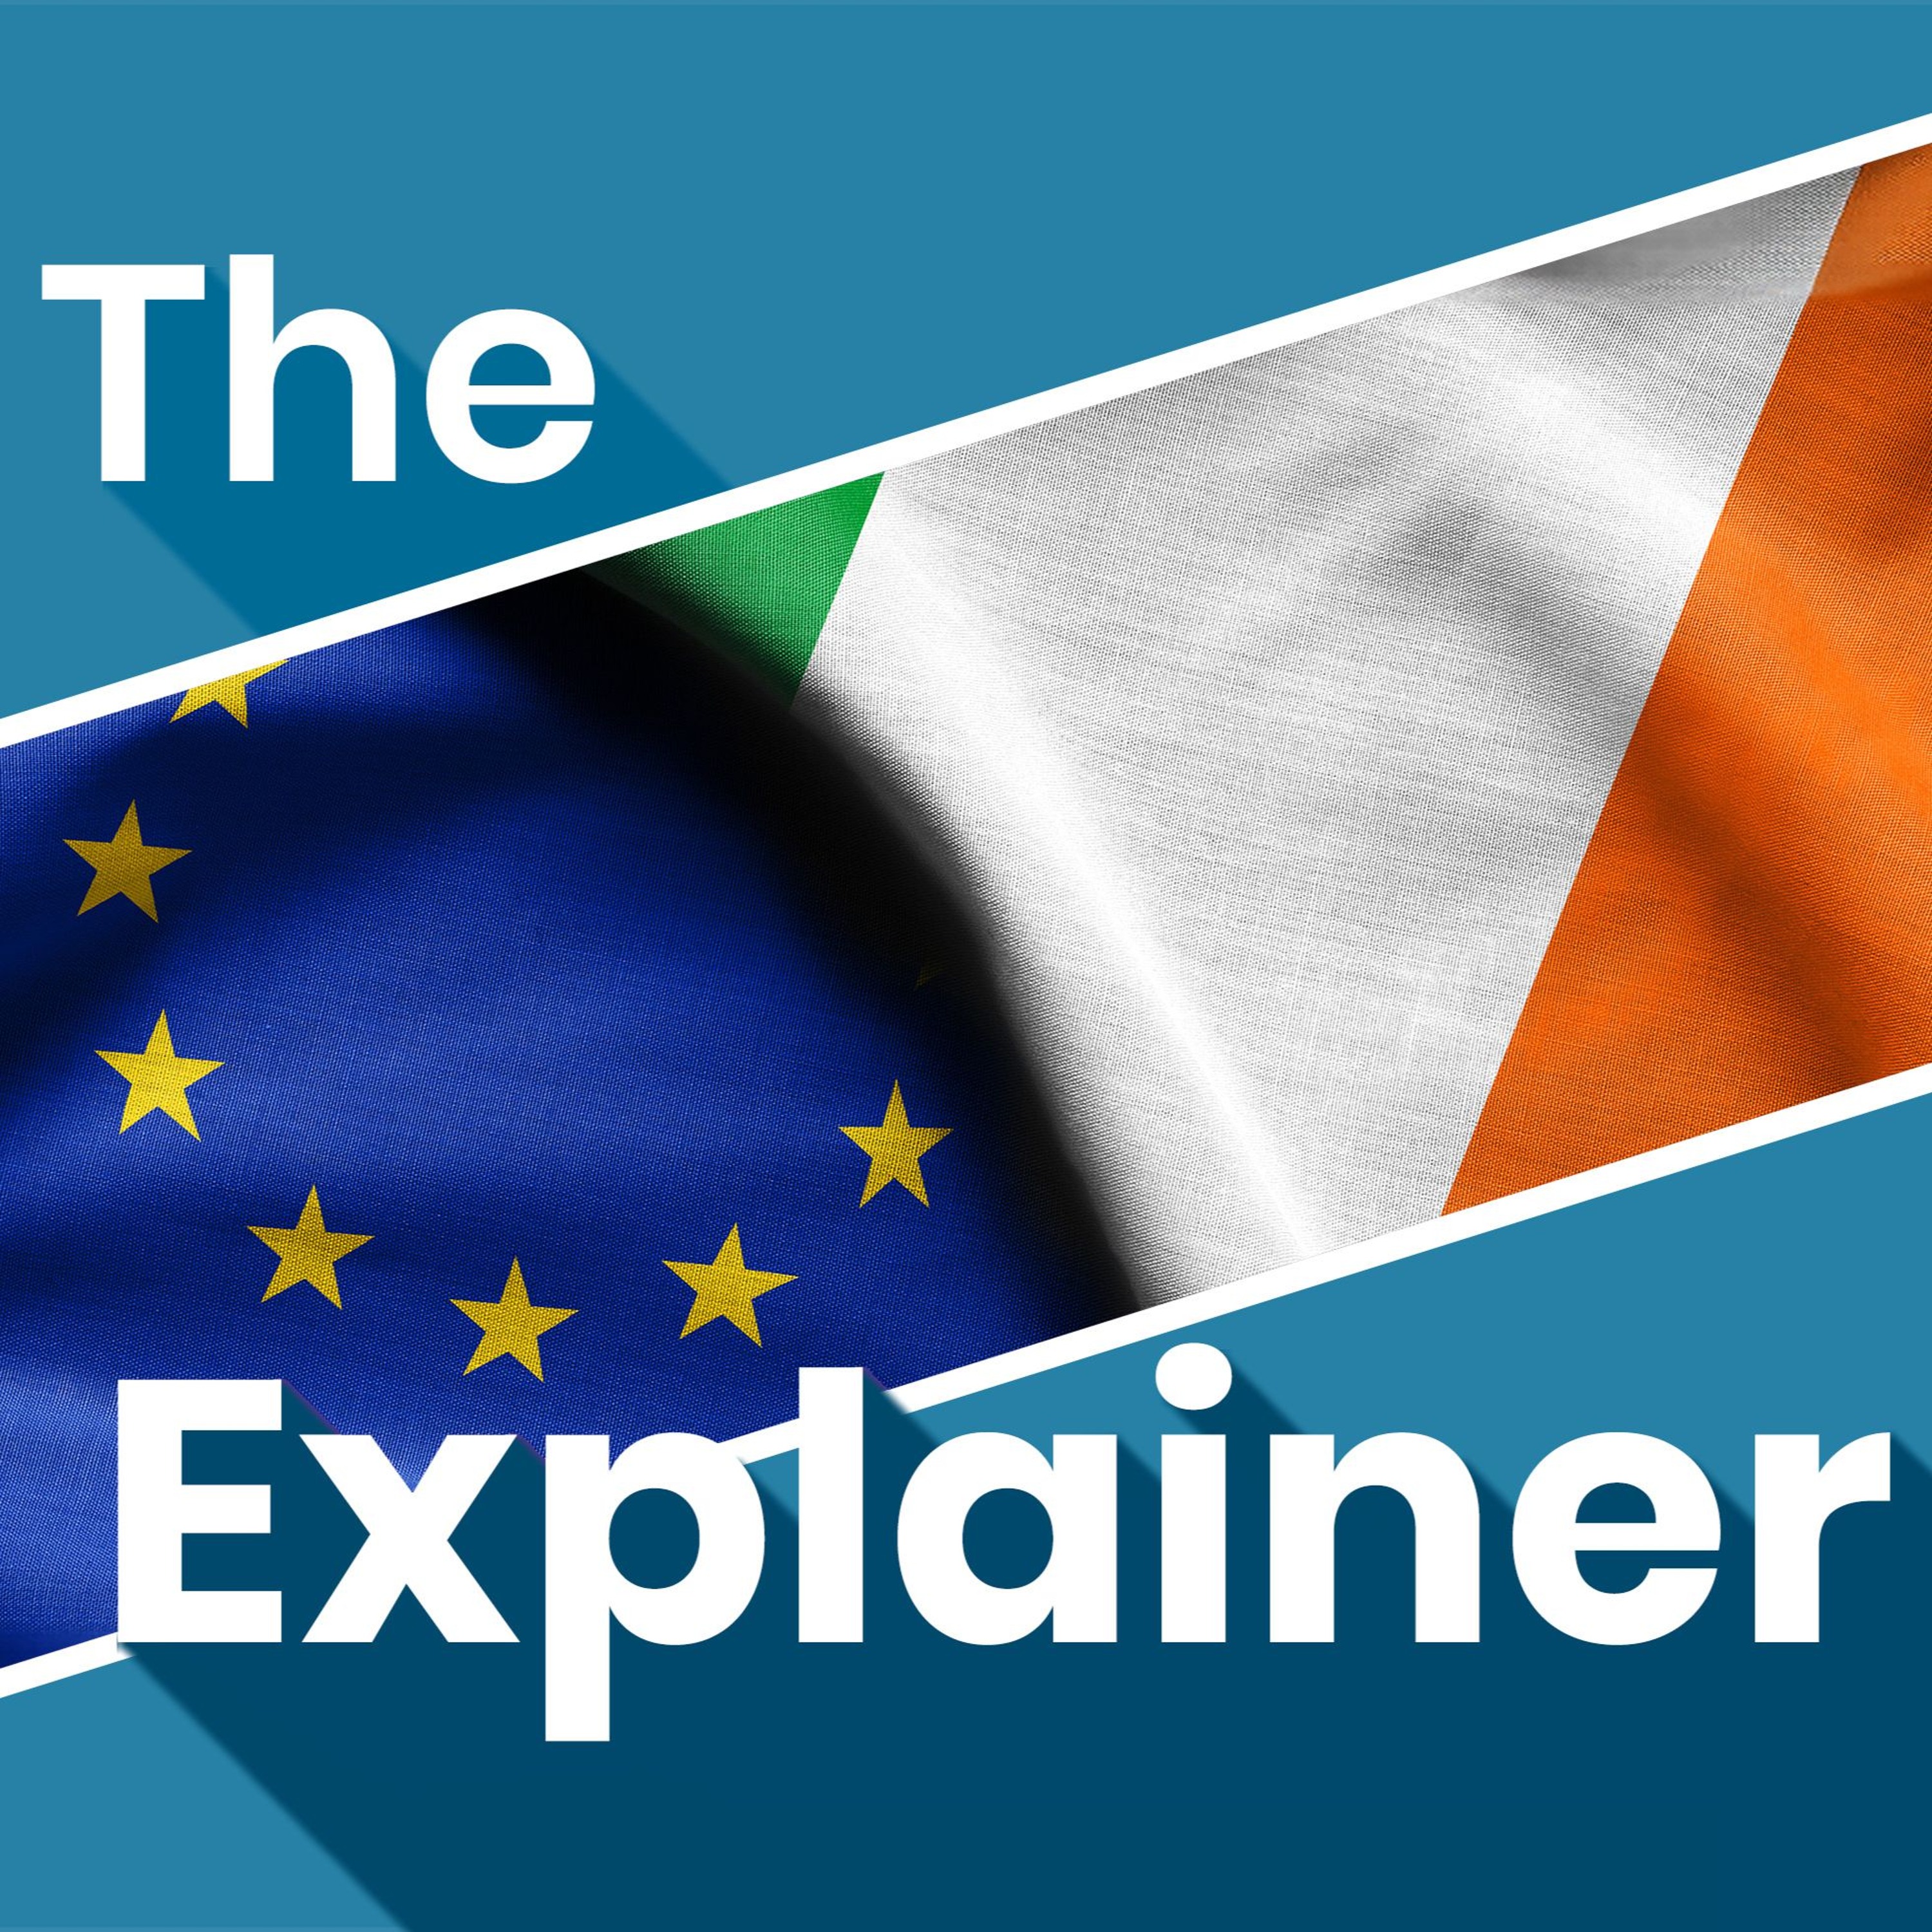 What is Ireland’s history with the European Union?